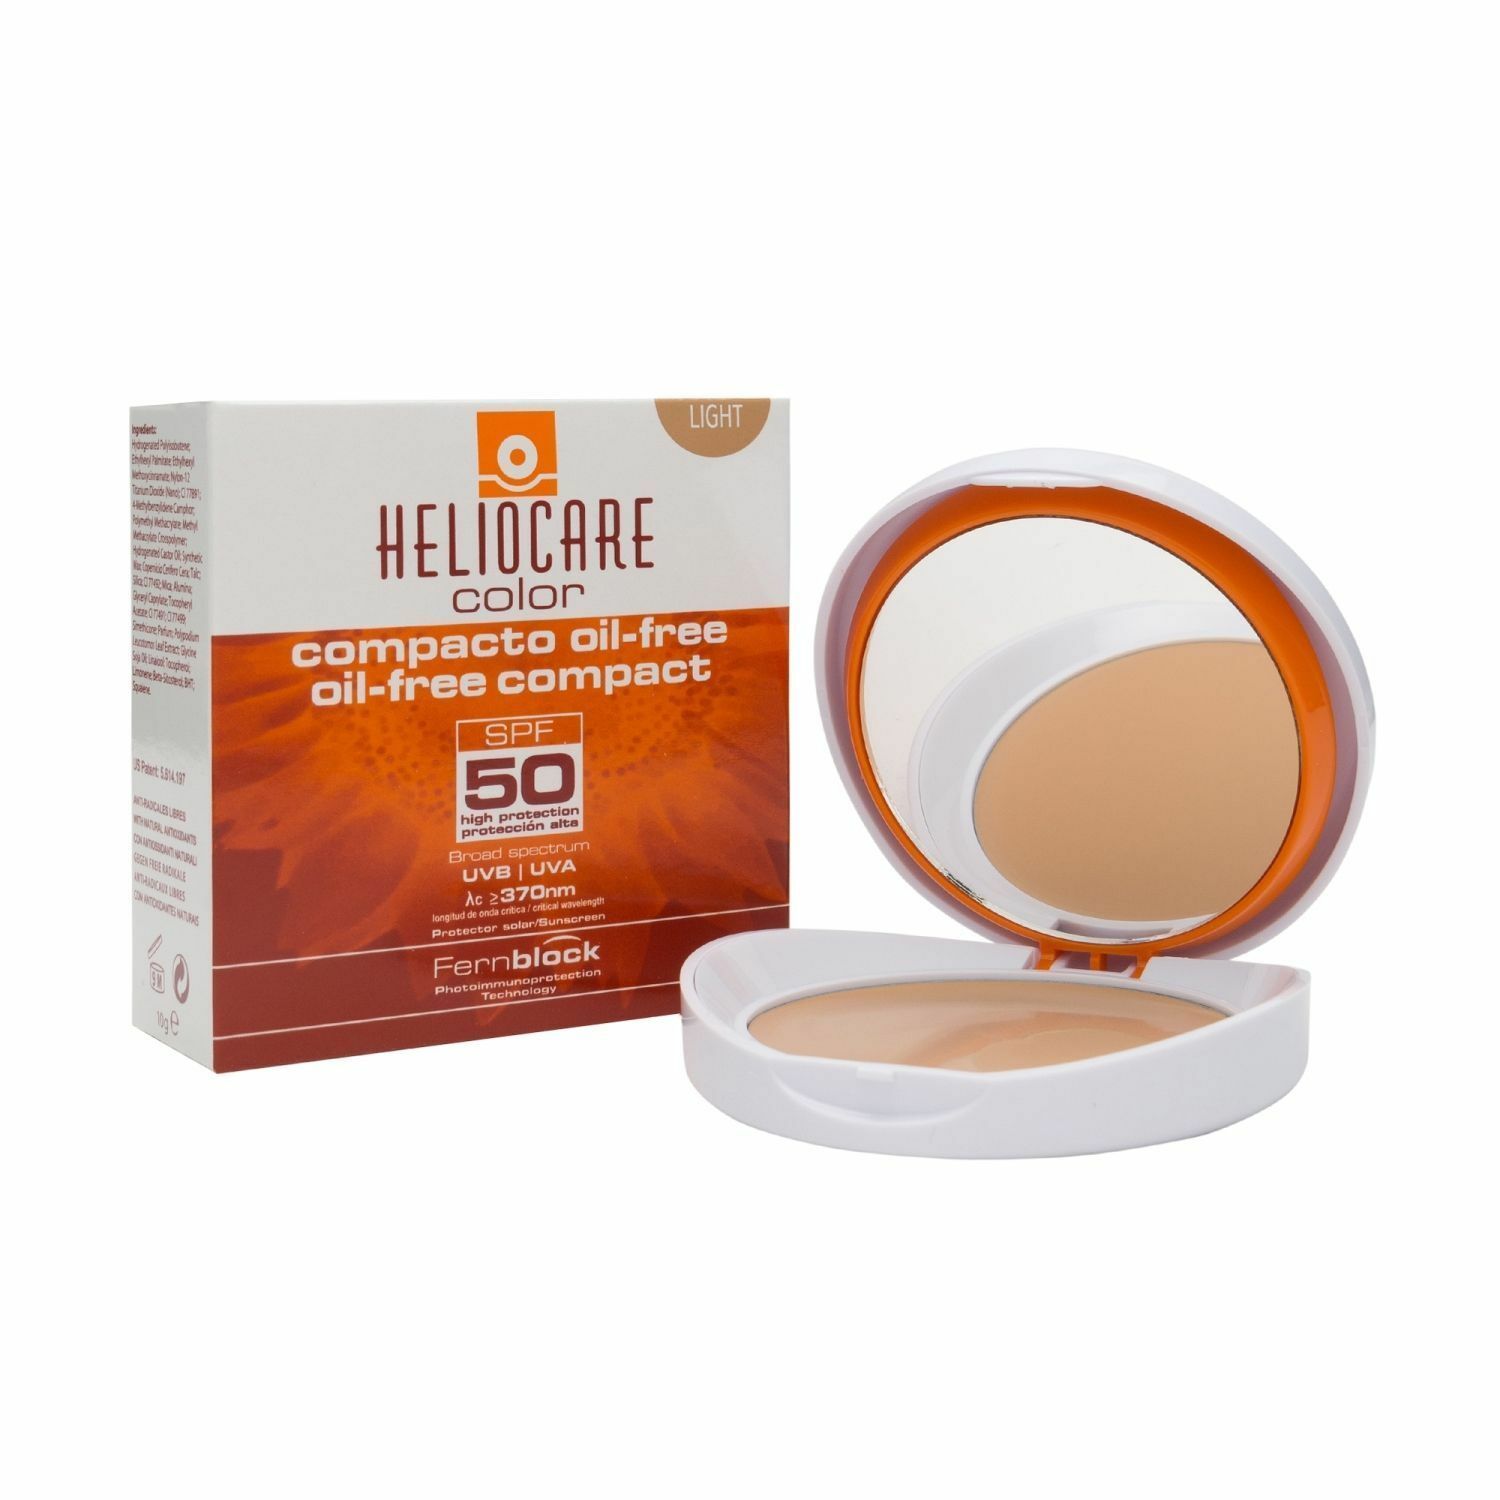 Heliocare Color Oil-Free Compact Light SPF 50~10g~Premium Quality~Beauty Results - $48.99